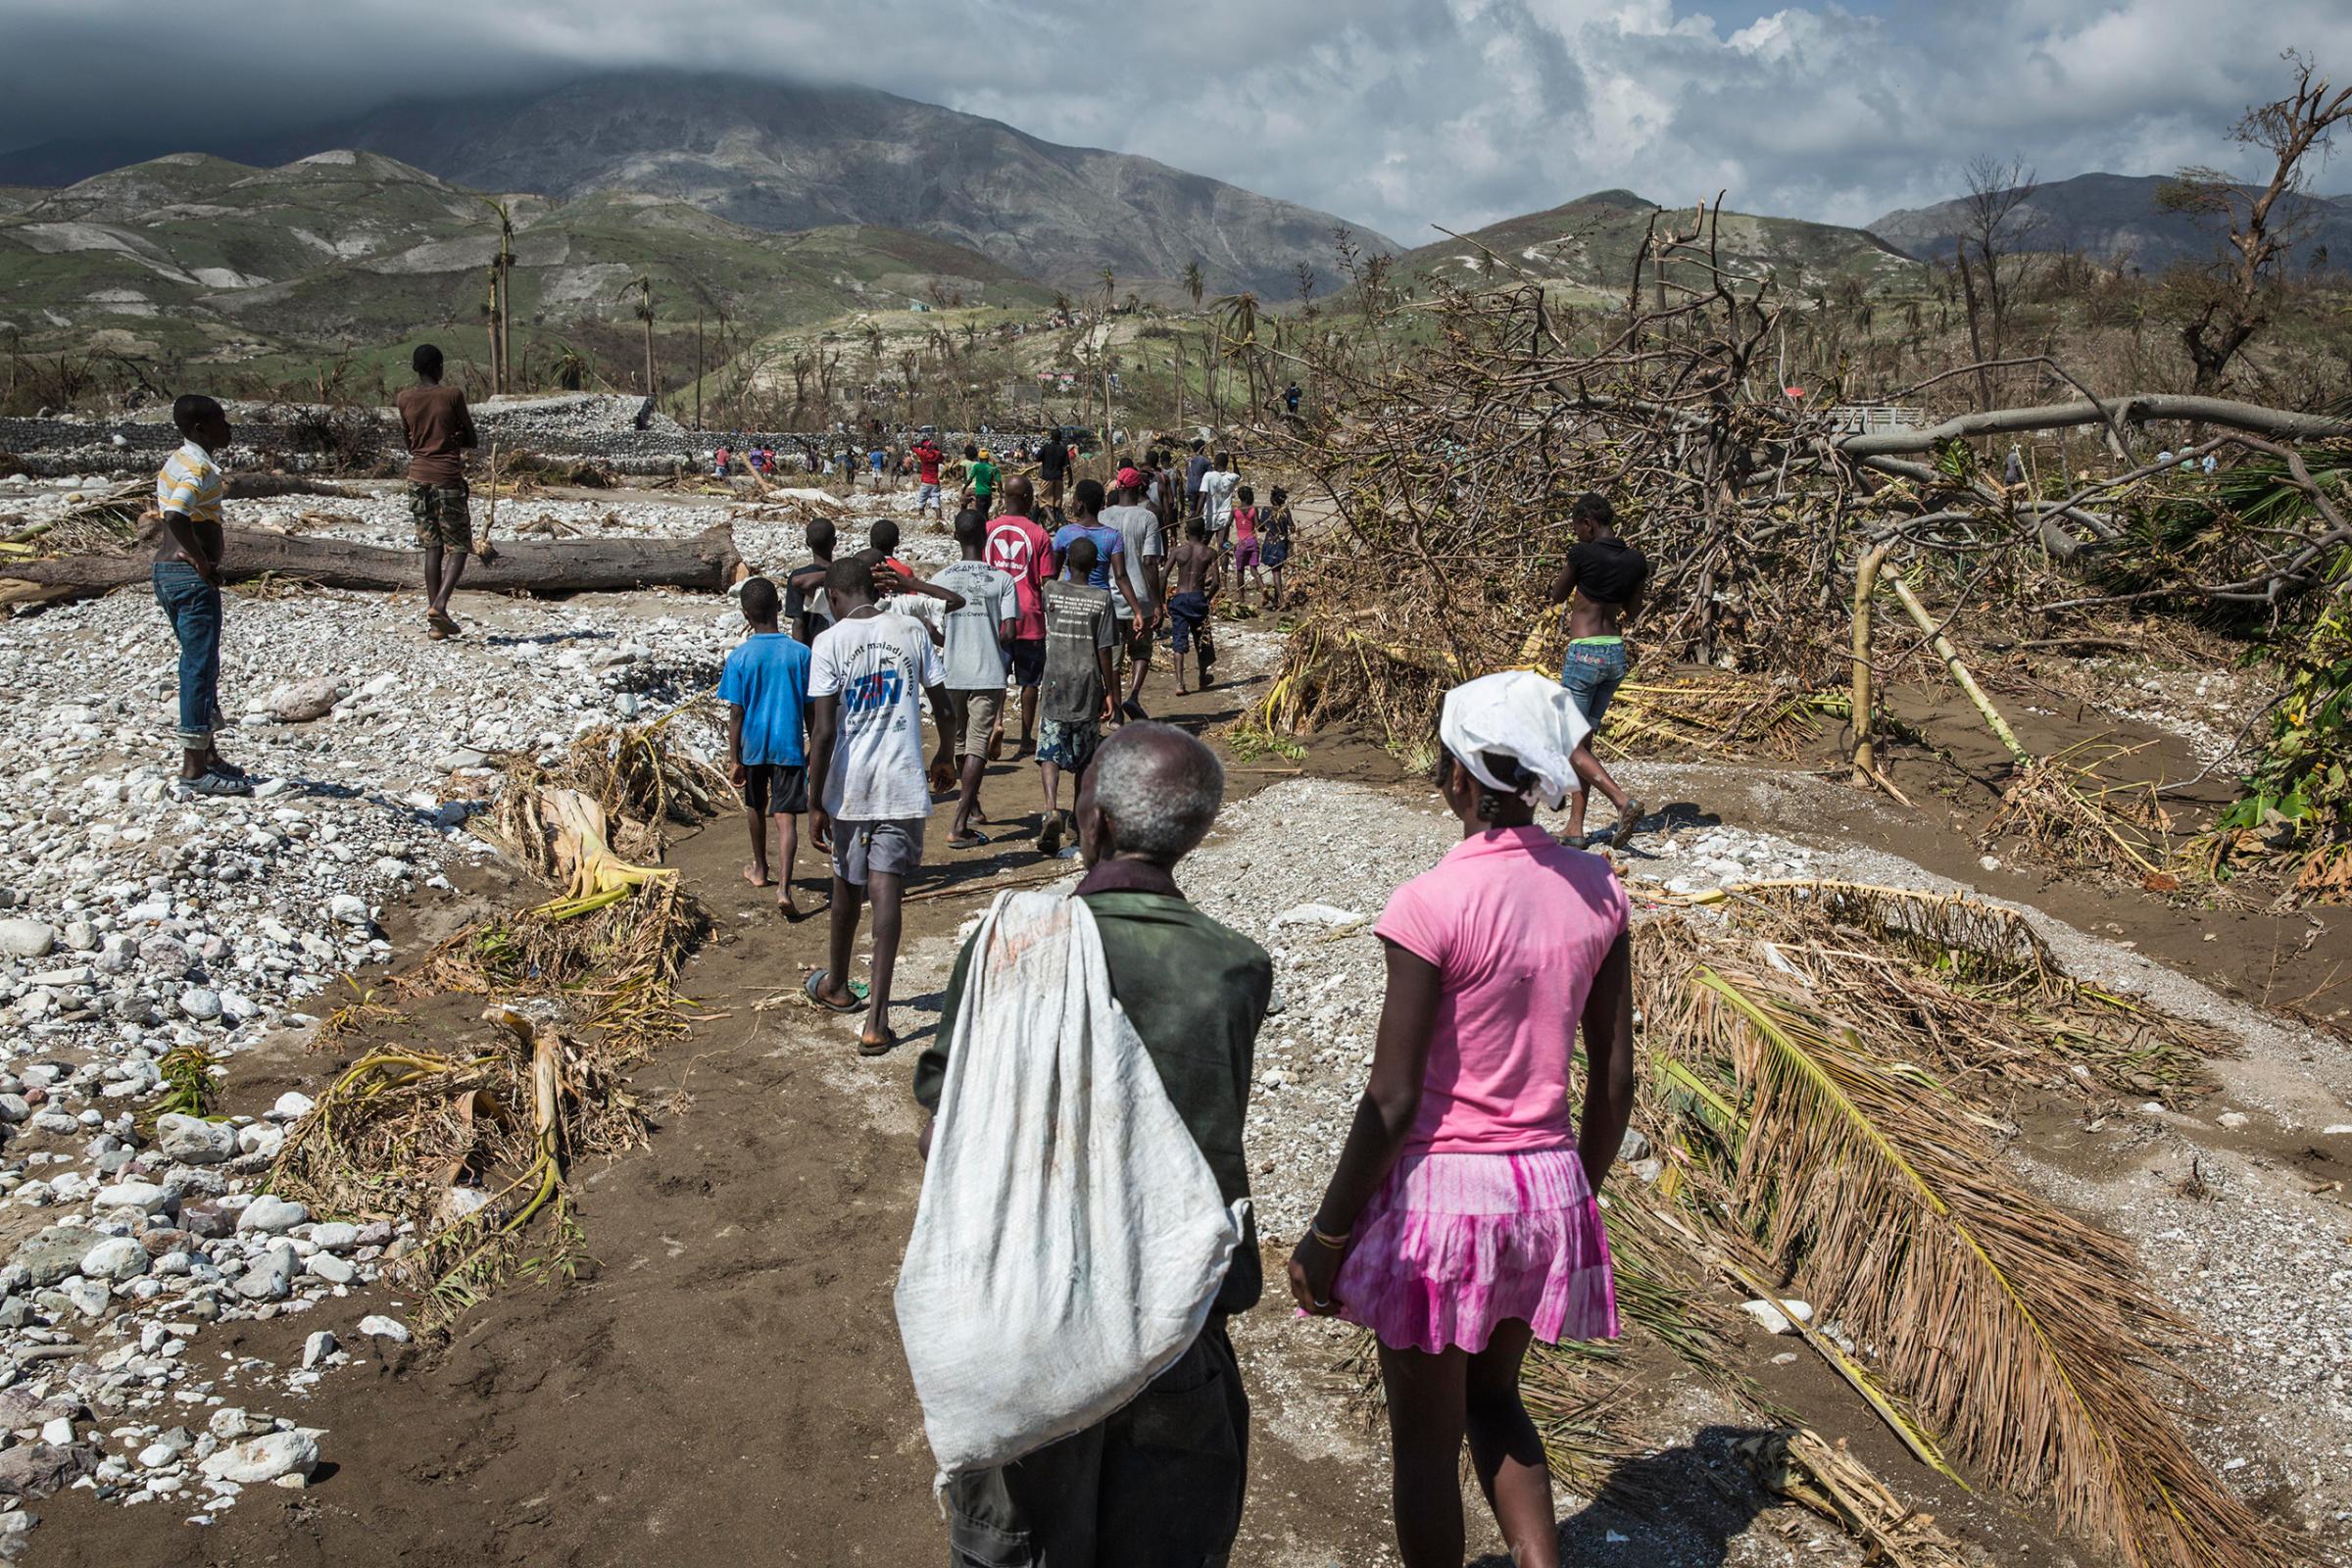 People walk along a path to the river in order to cross through the water on foot as the bridge has collapsed in Roche-a-Bateau, southwestern Haiti, on Oct. 8, 2016. Many Haitians originally from the south of the country are returning home to visit family and help in the recovery from the impact of Hurricane Matthew.